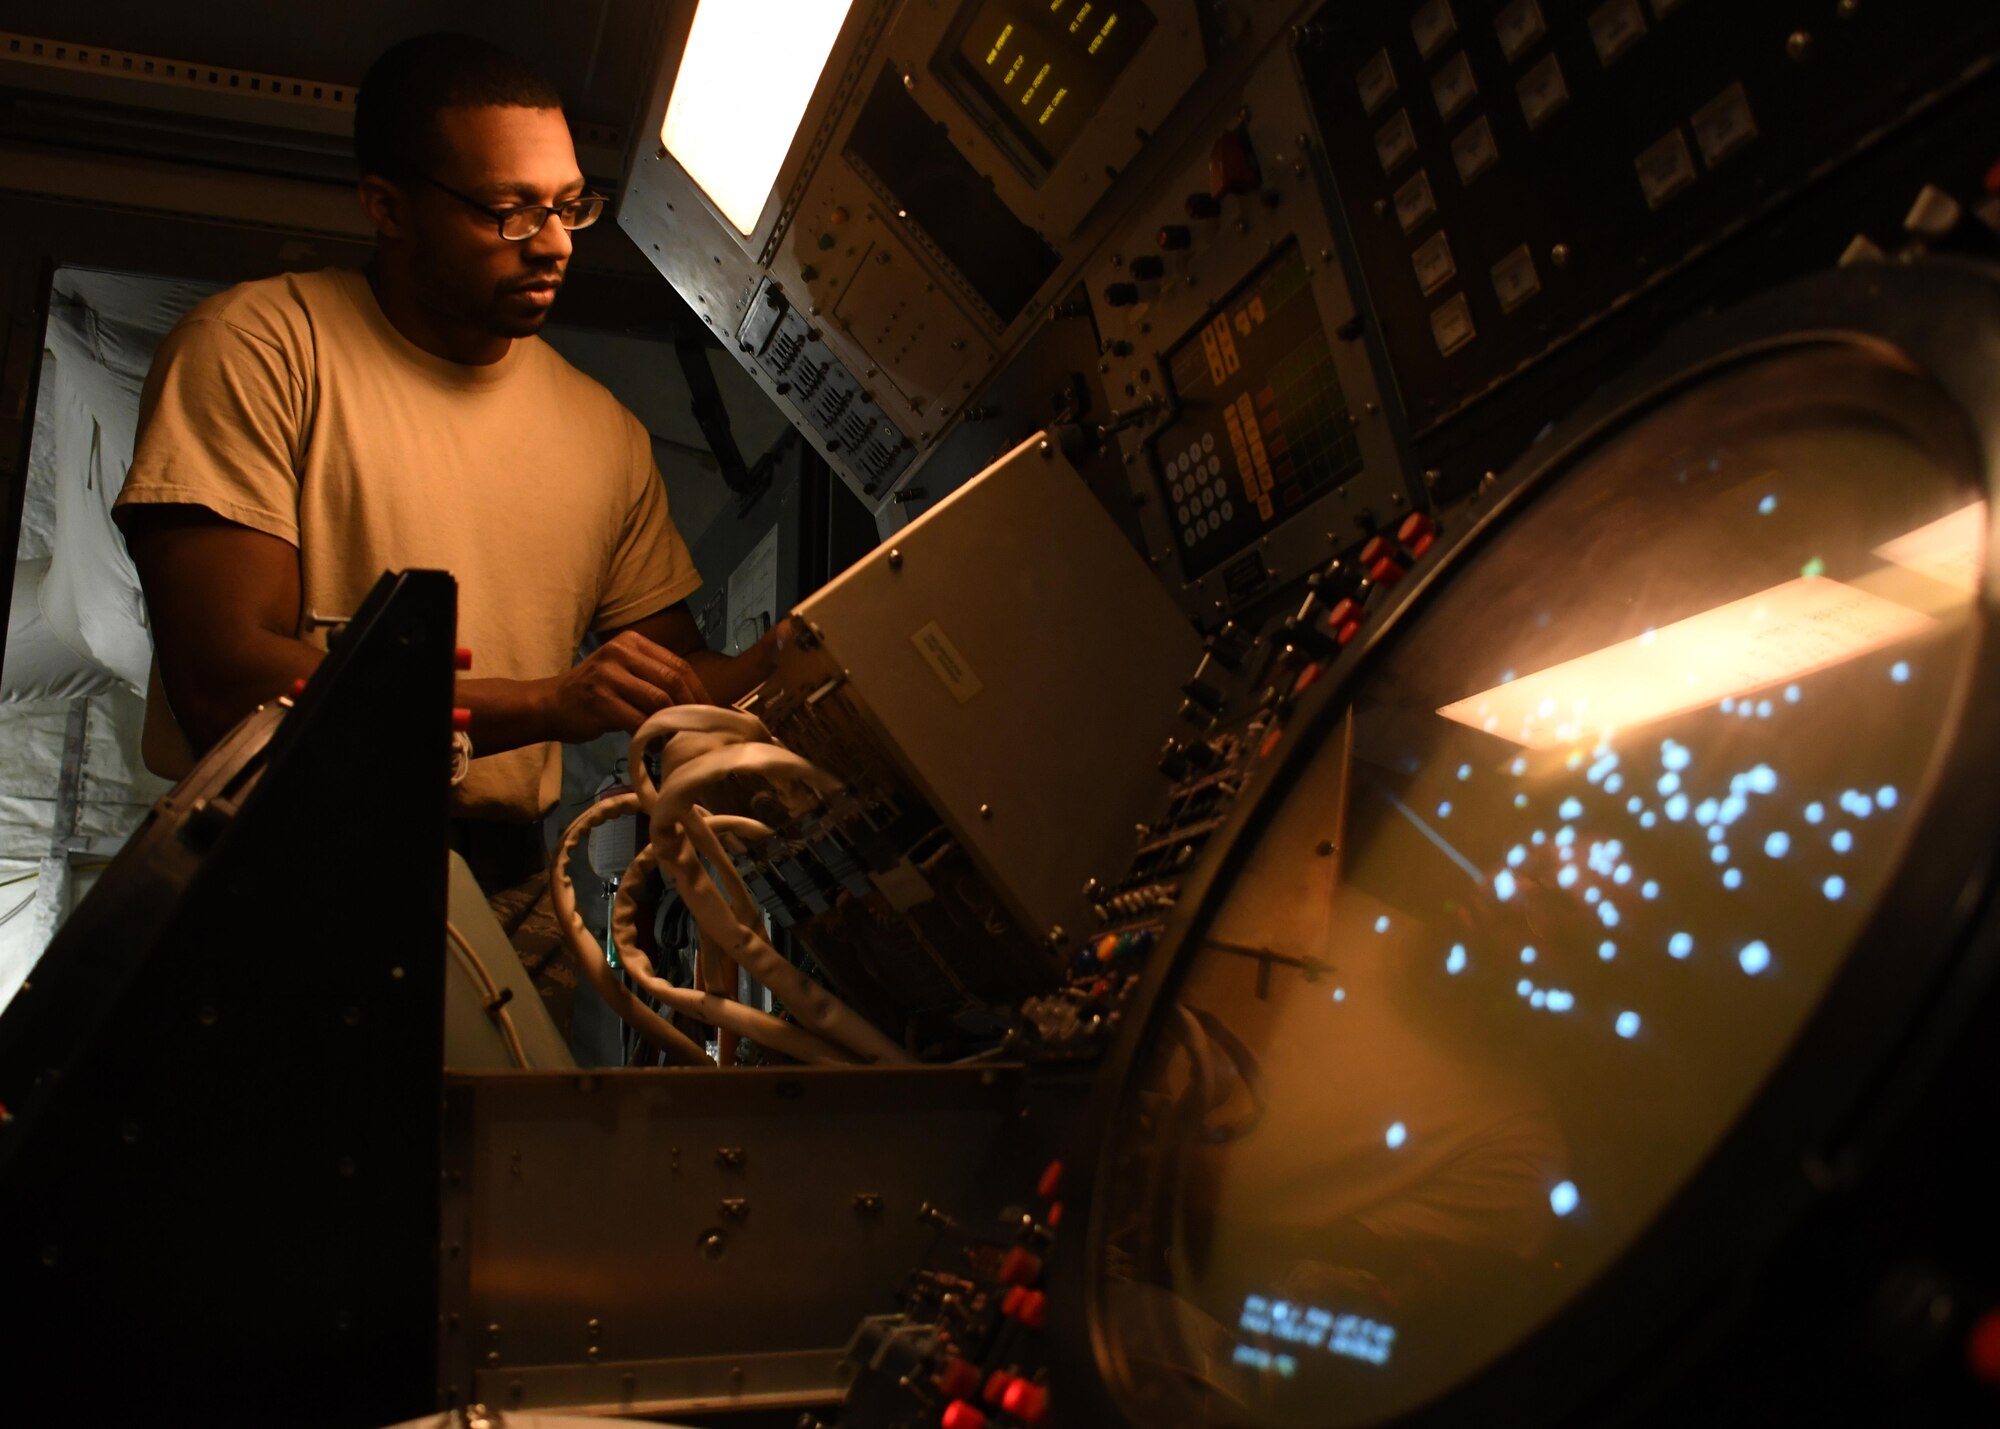 U.S. Air Force Senior Airman Darrin Brewer, a ground radar systems technician with the 727th Expeditionary Air Control Squadron Detachment 3, checks the plan position indicators inside of a radar system at Al Udeid Air Base, Qatar, March 31, 2017. The 727th EACS Det. 3 works to maintain two ground radar systems at Al Udeid, and ensures that at least one of them is running at all times. (U.S. Air Force photo by Senior Airman Miles Wilson)